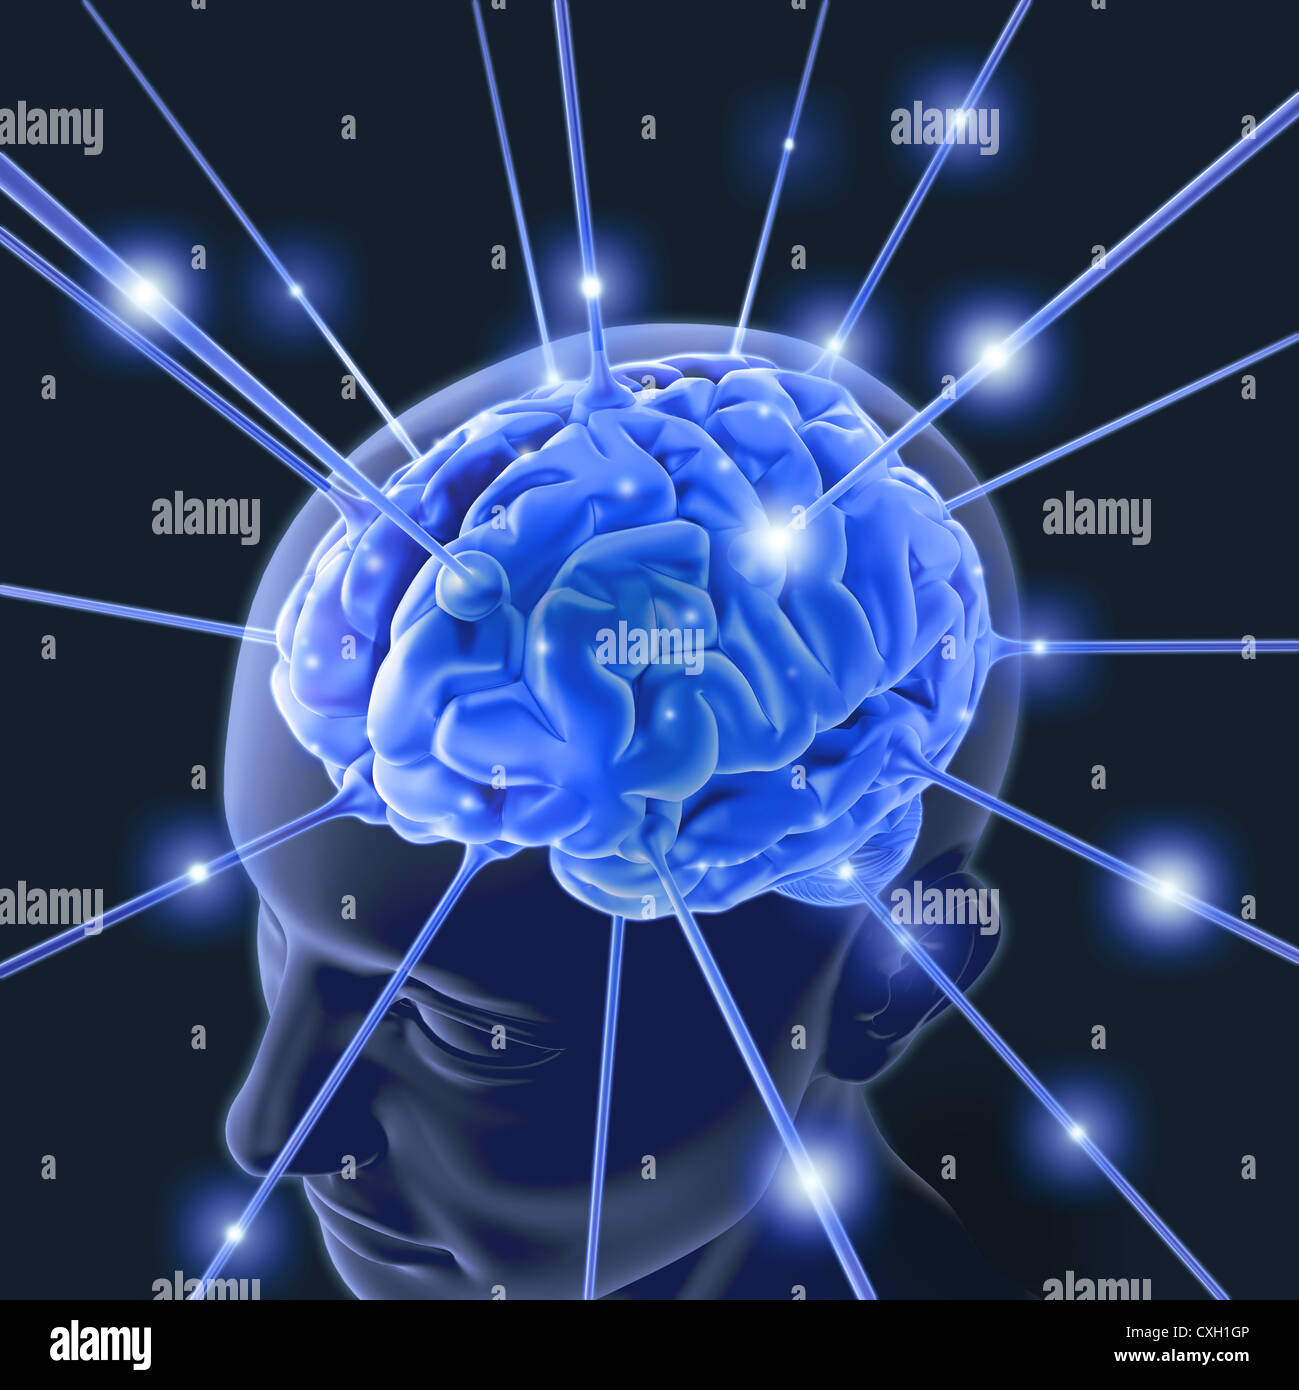 Brain connected by wires receiving energy pulses. Stock Photo